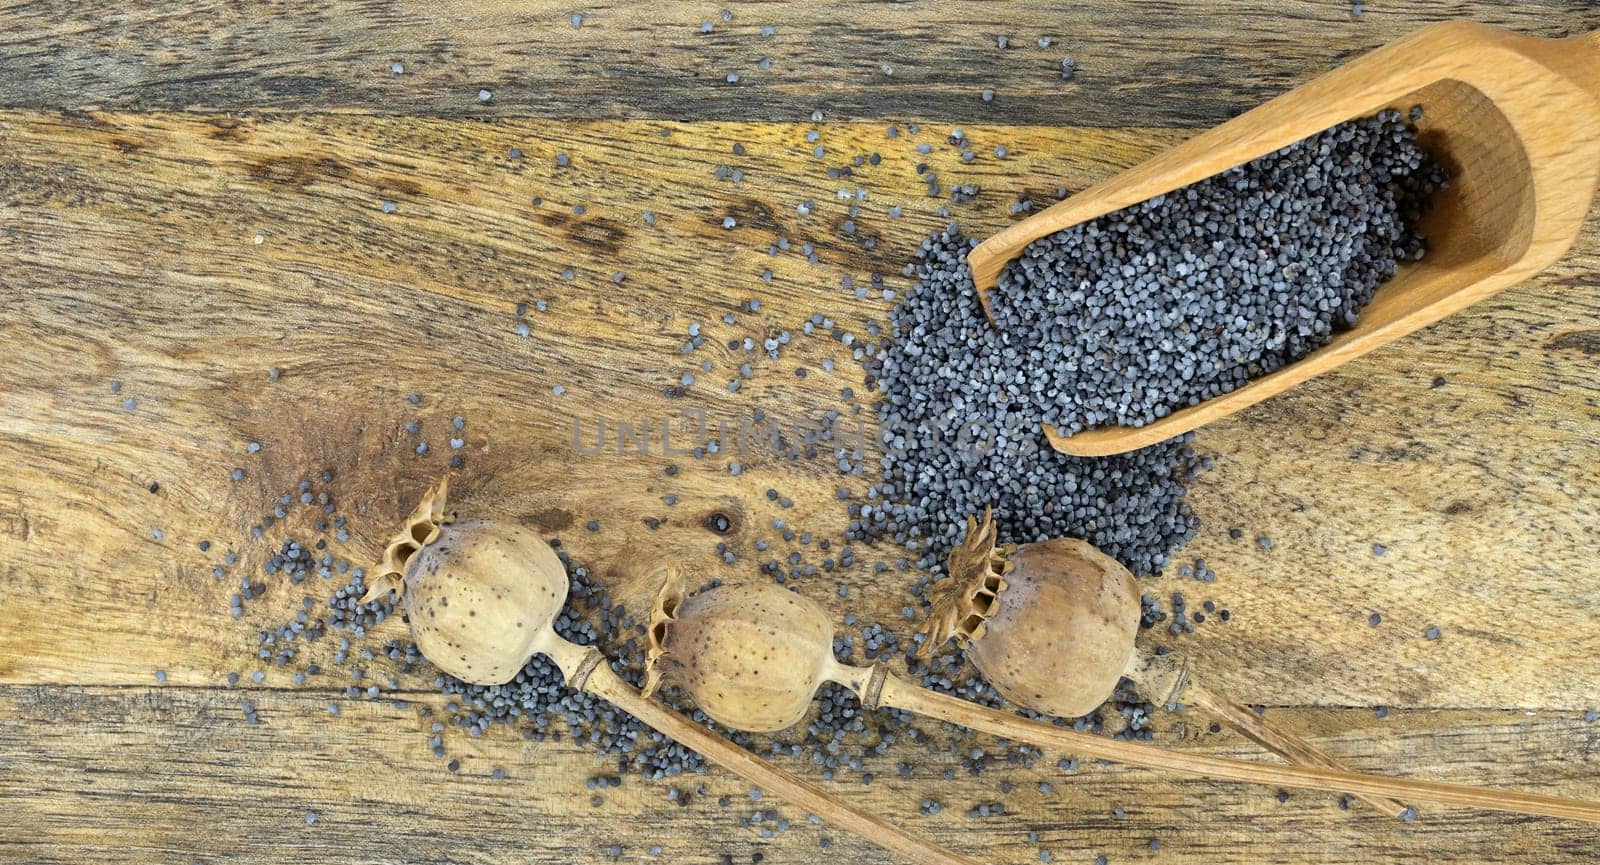 Black poppy seeds and dried poppy seed heads scattered on rustic wooden table